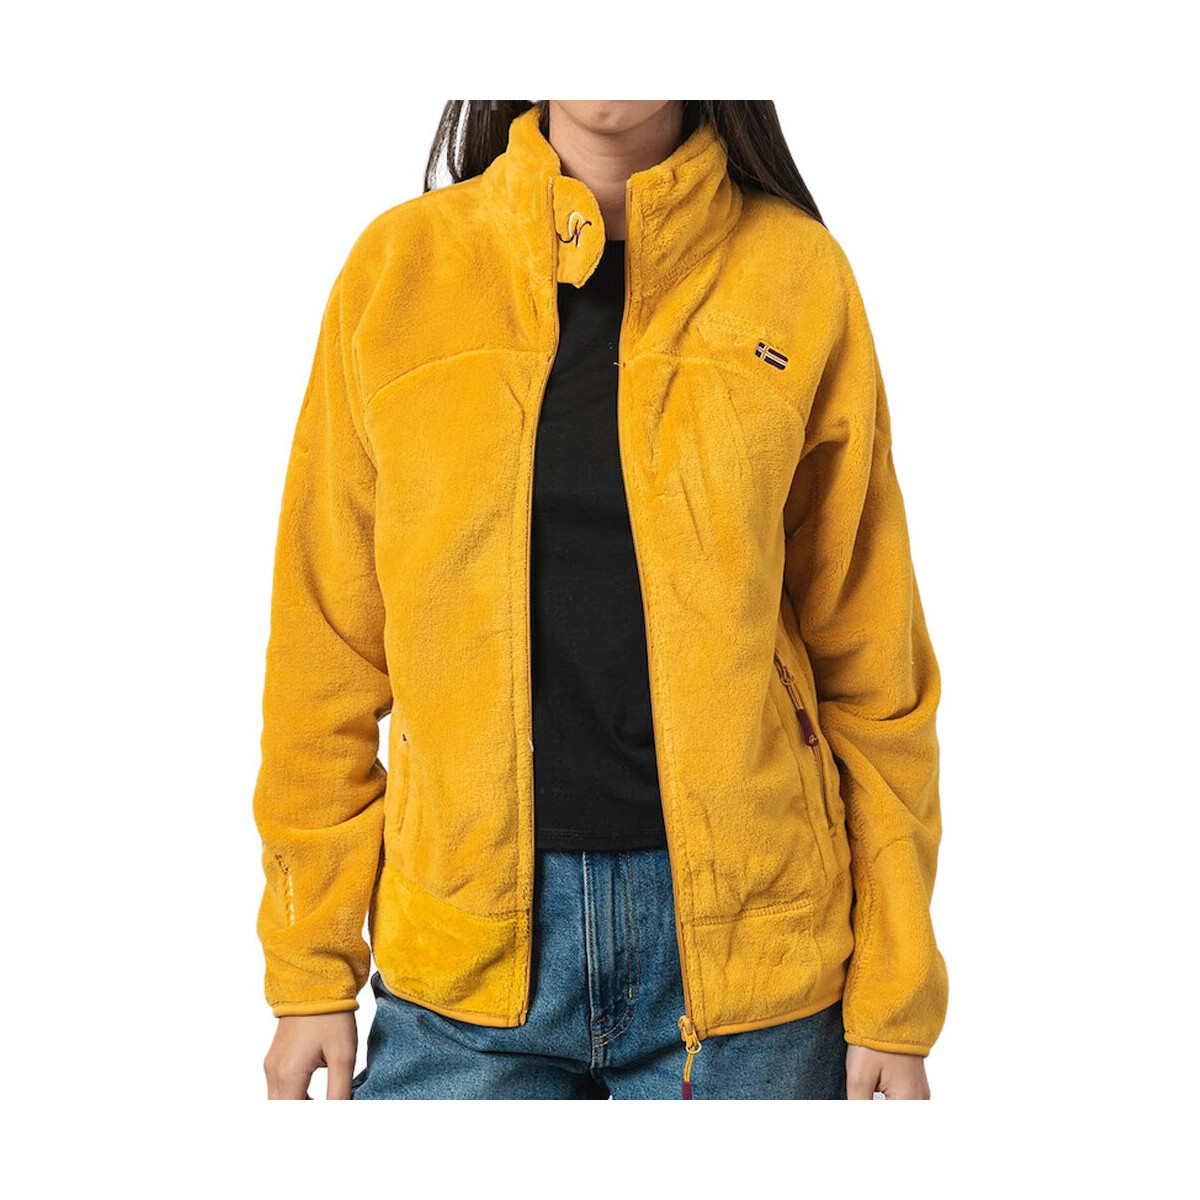 Vêtements Femme Polaires Geographical Norway WR624F/GN Jaune